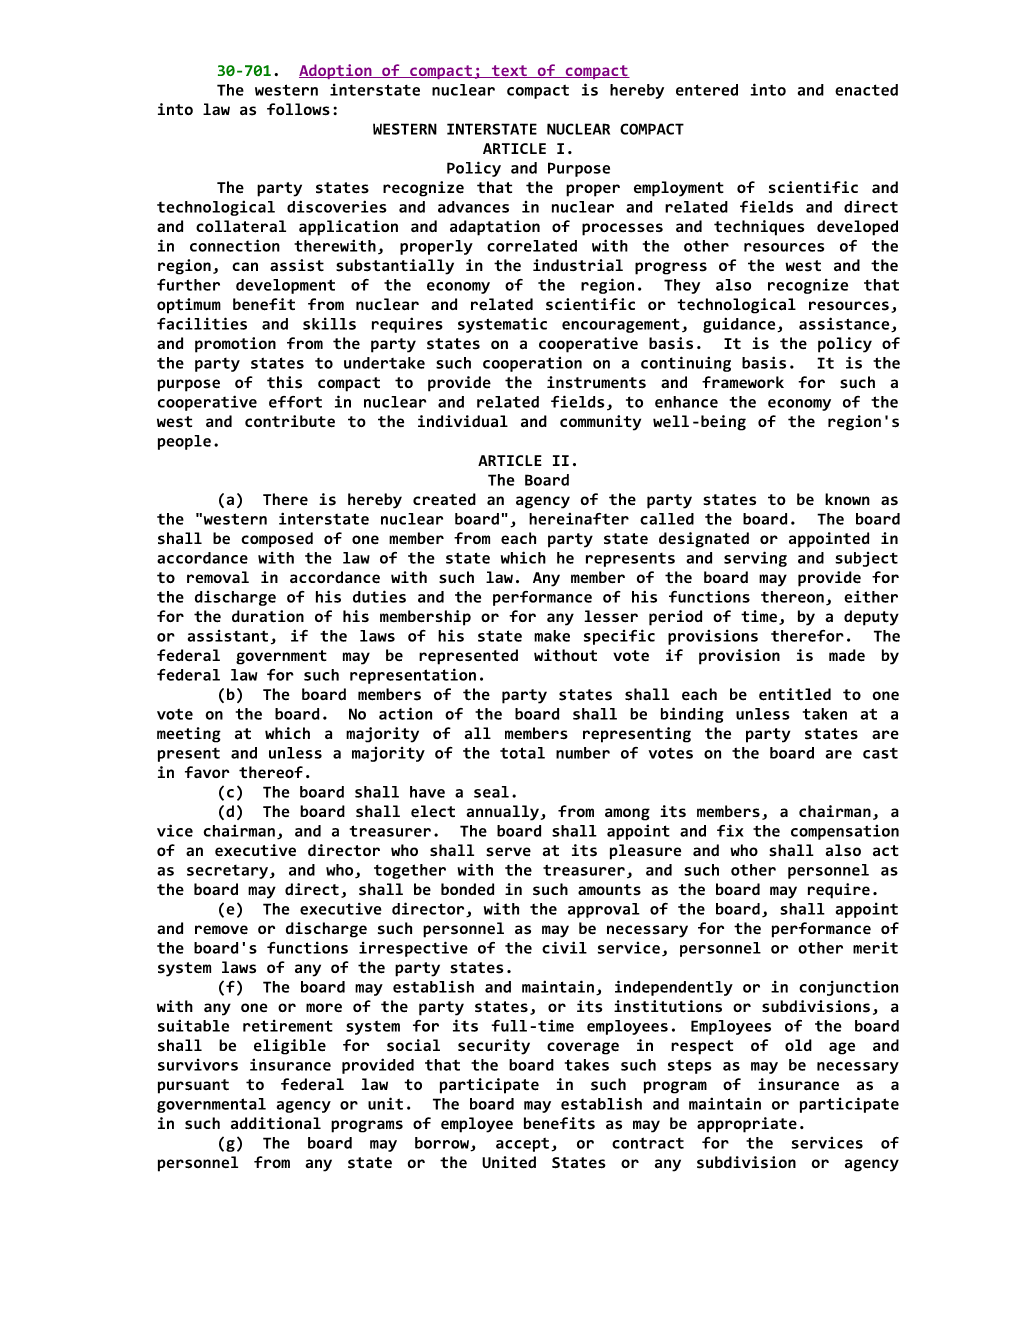 START STATUTE30-701.Adoption of Compact; Text of Compact